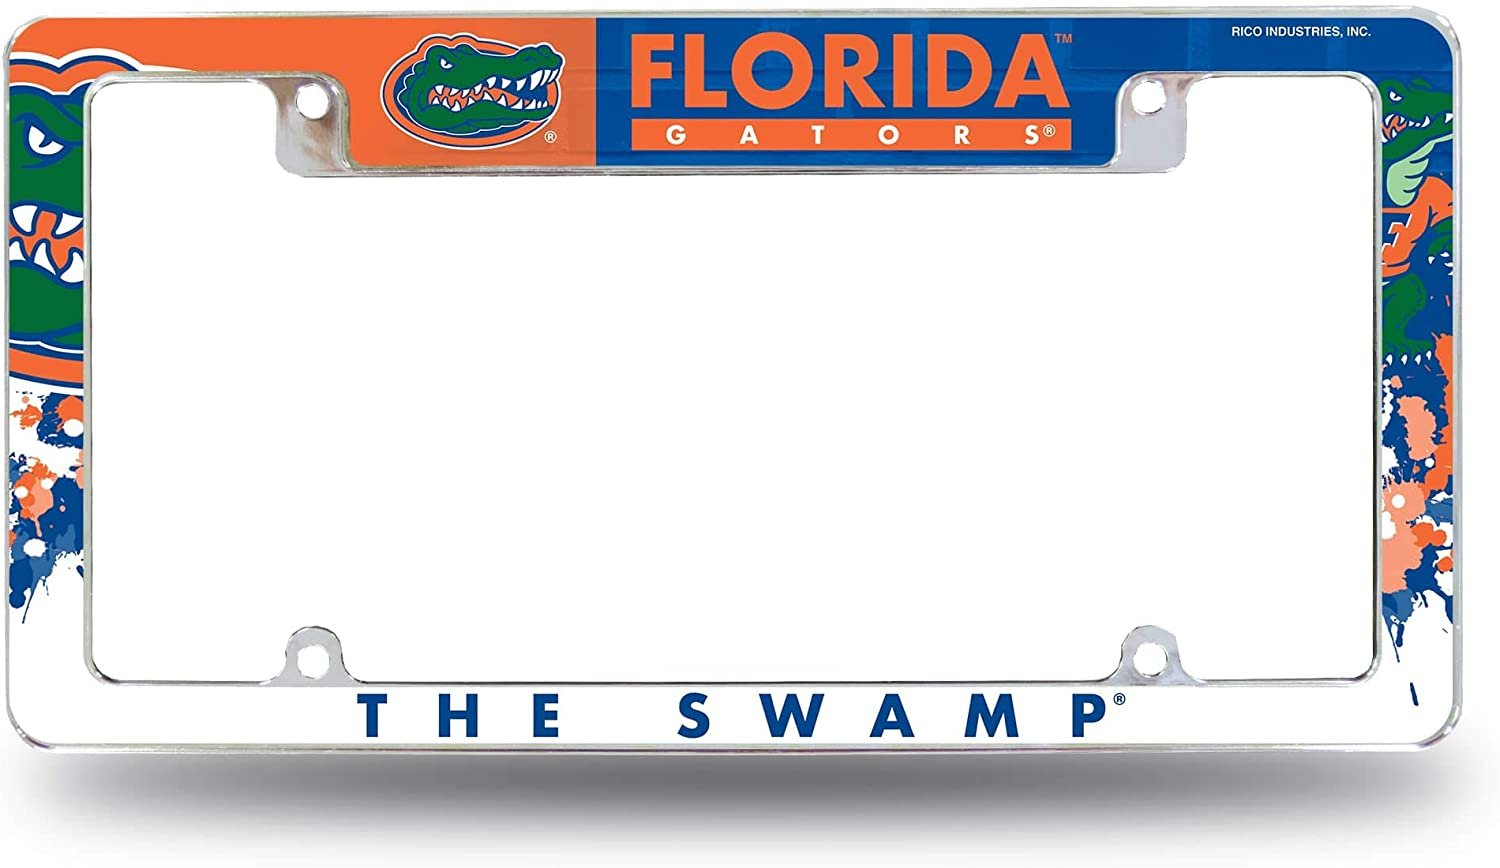 University of Florida Gators Metal License Plate Frame Chrome Tag Cover, All Over Design, 6x12 Inch